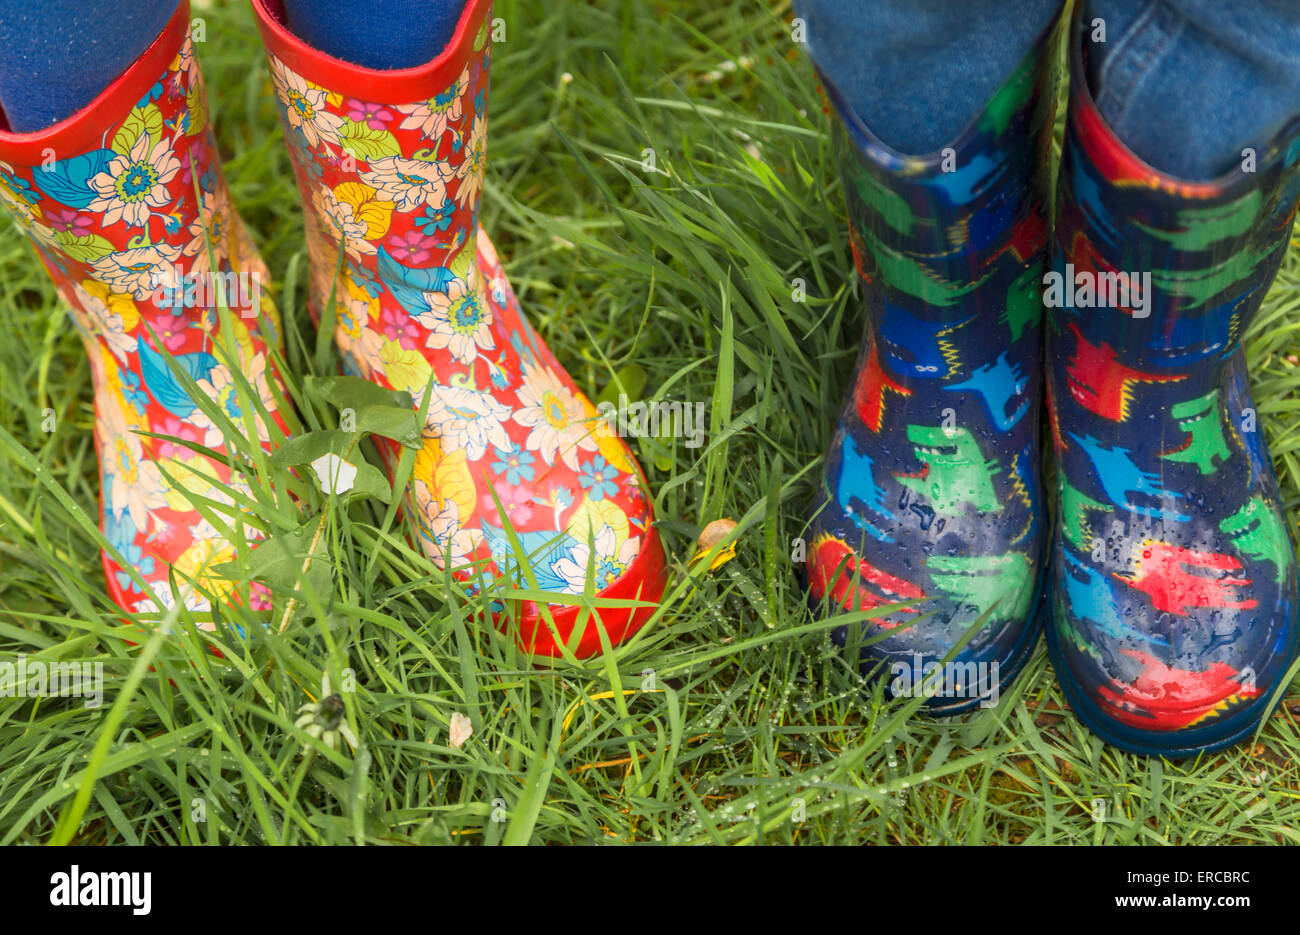 Children wearing colorful gumboots on a rainy day in spring in the garden of Standen House, East Grinstead, Sussex, England, UK. Stock Photo